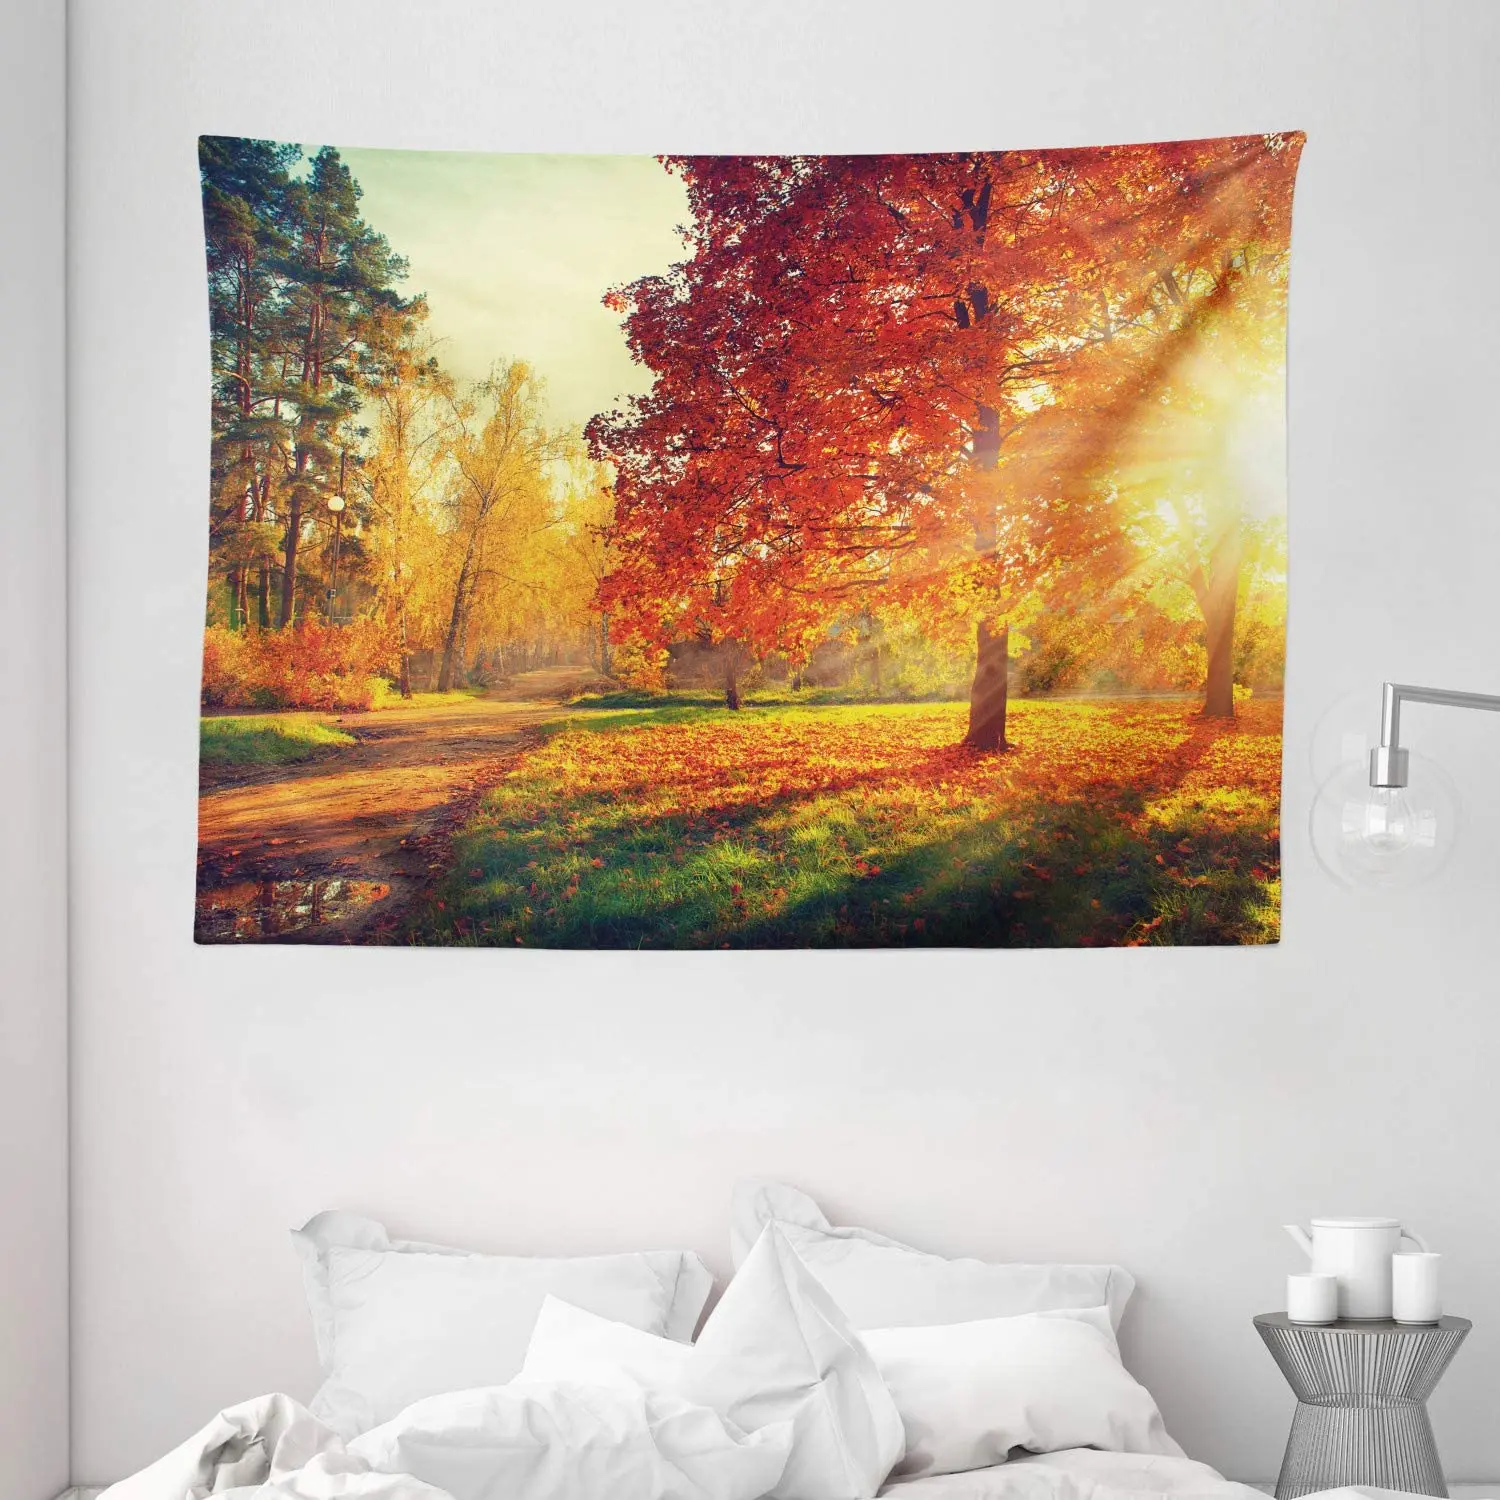 

Fall Tapestry Vibrant Misty Day In Forest Sun Rays Trees Foliage Fallen Leaves Calm Wall Hanging For Bedroom Living Room Dorm